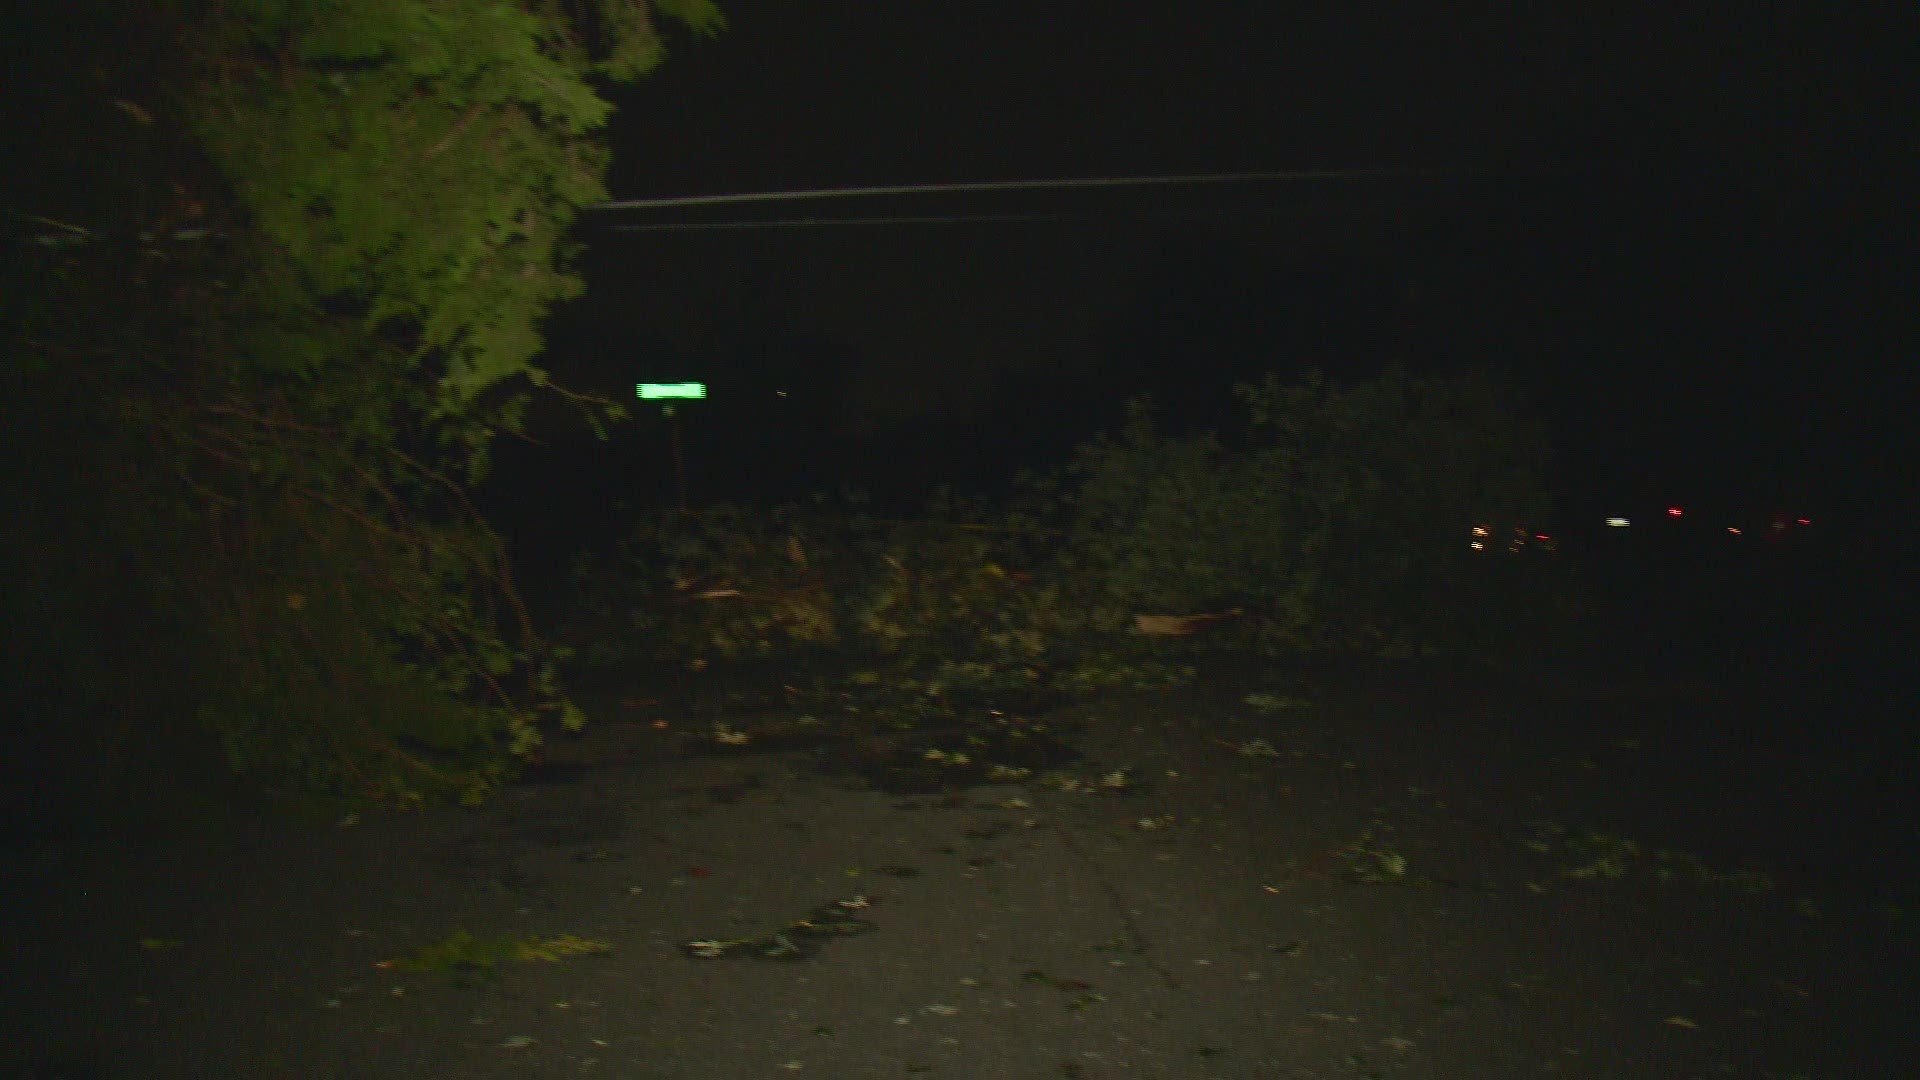 Video shows the damage after a microburst occurred in Prince Georges county Friday evening.